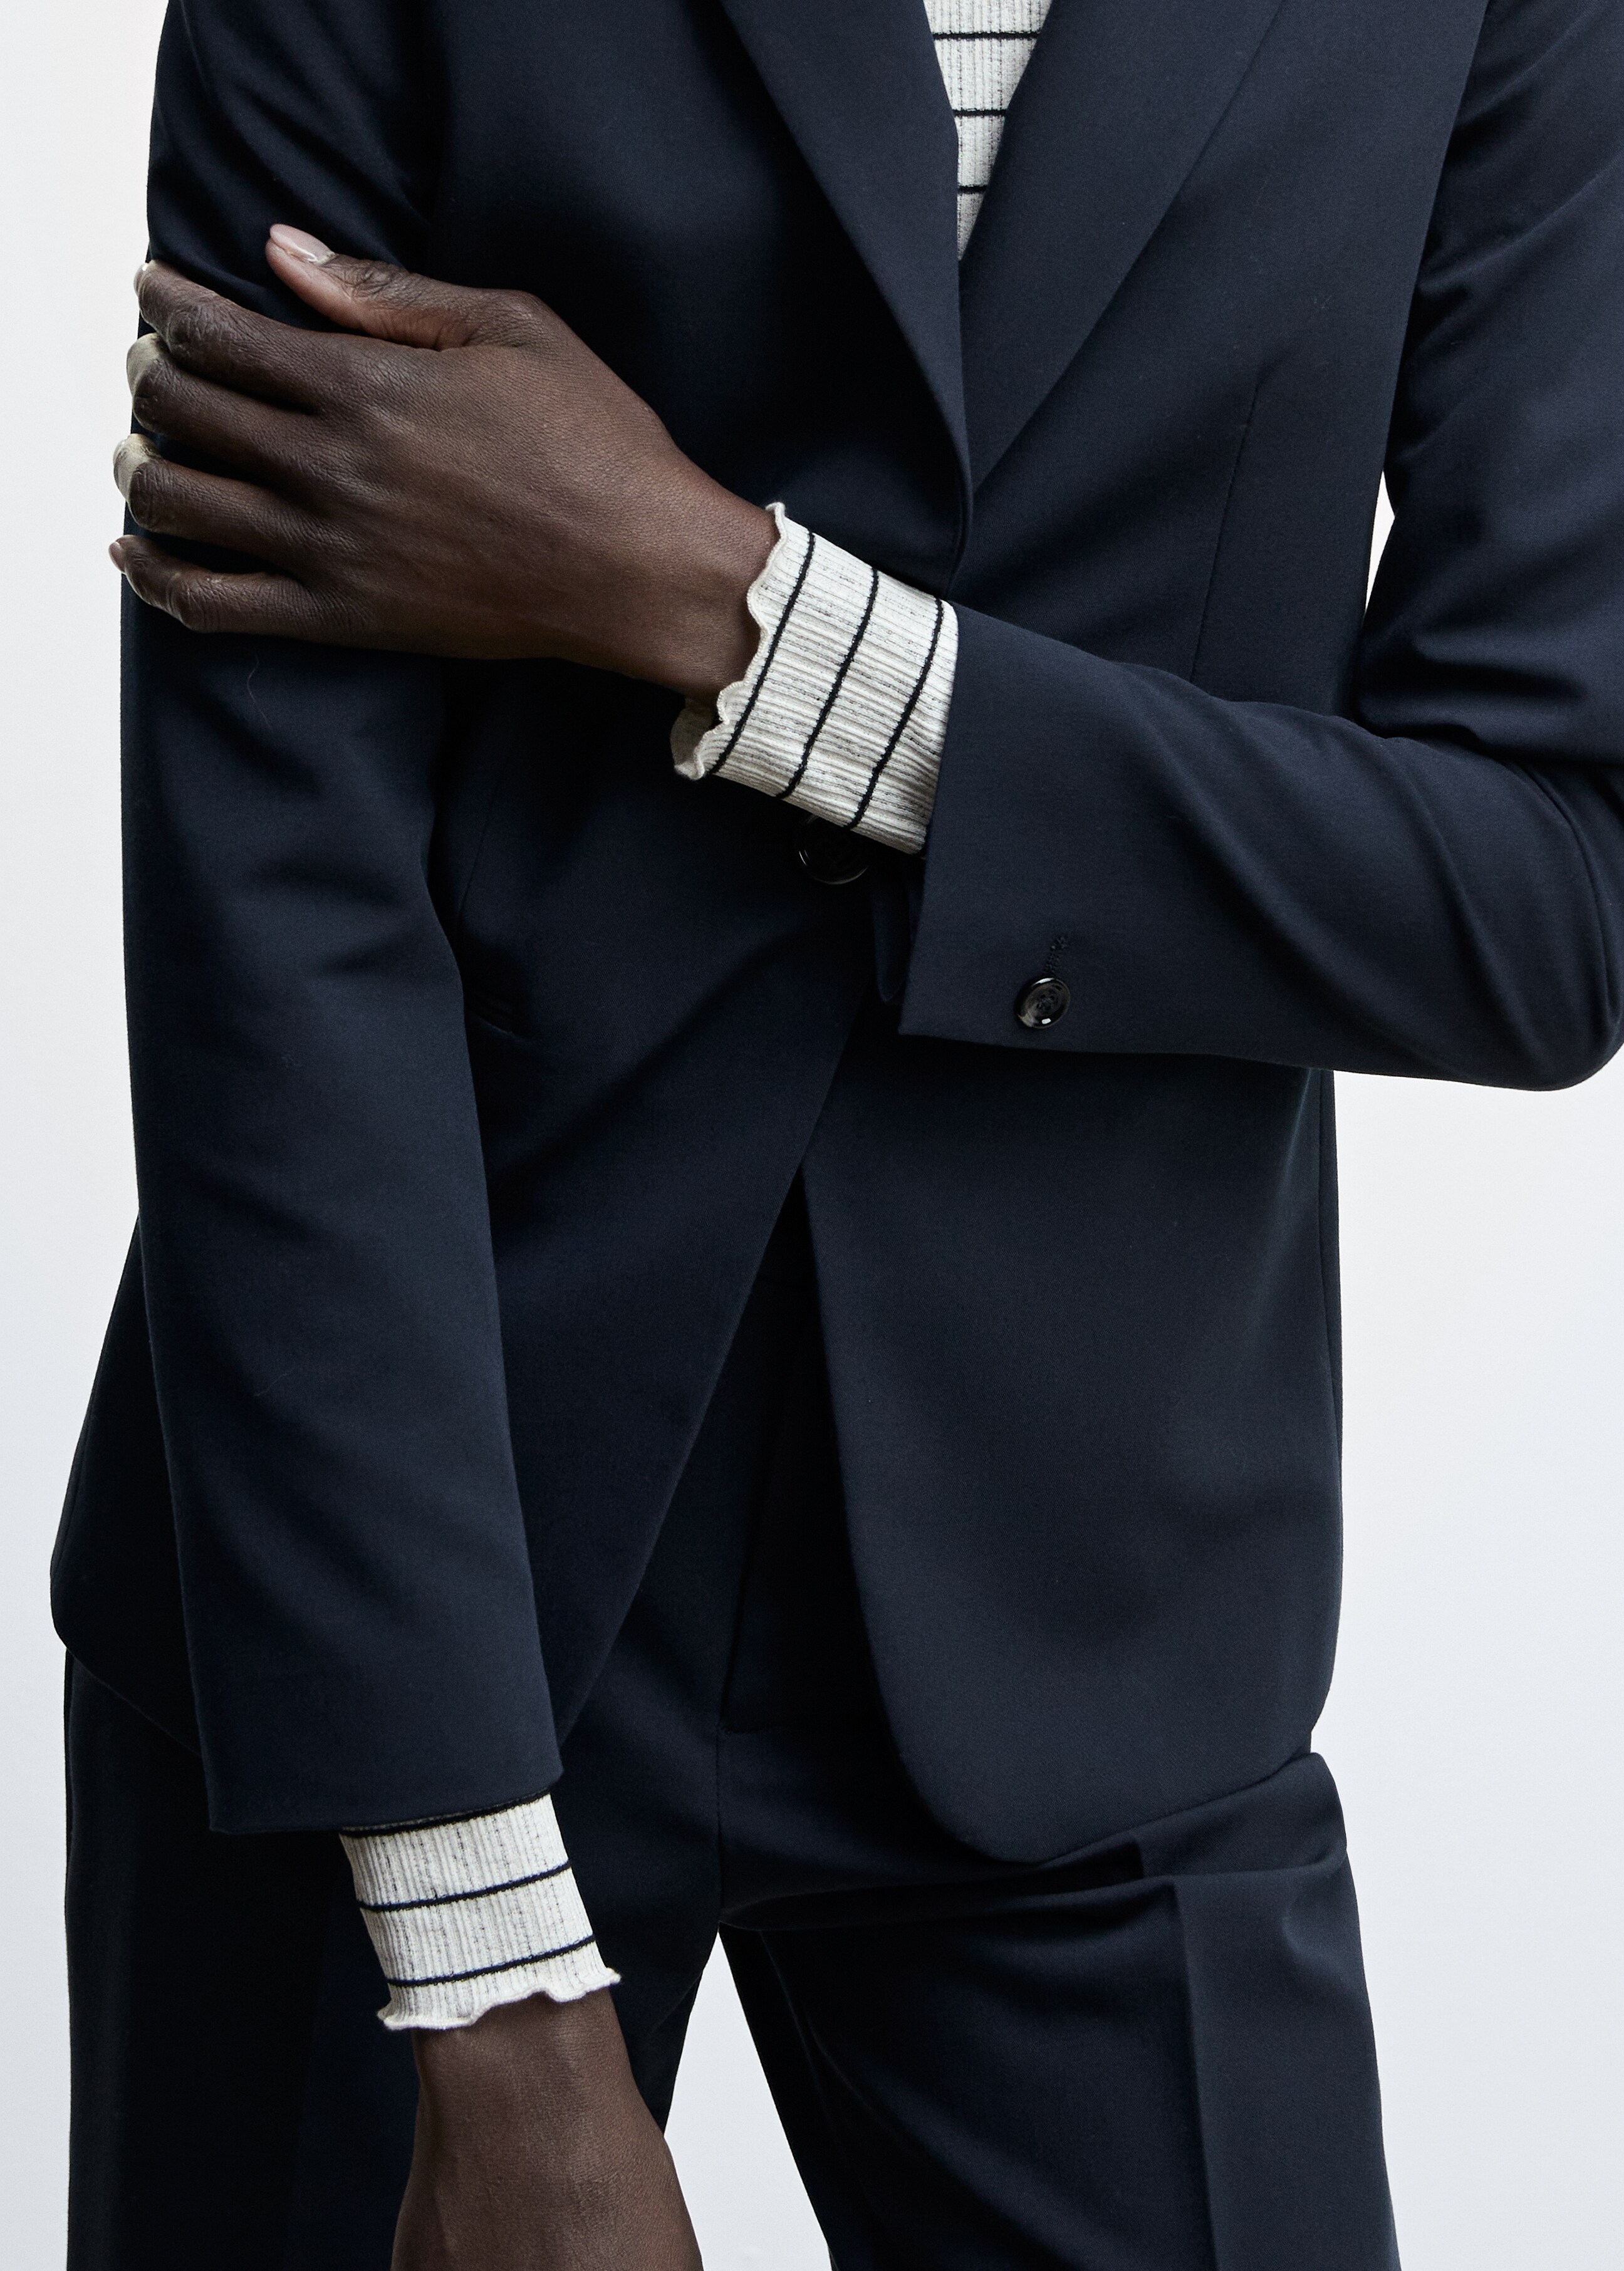 Fitted suit jacket - Details of the article 6